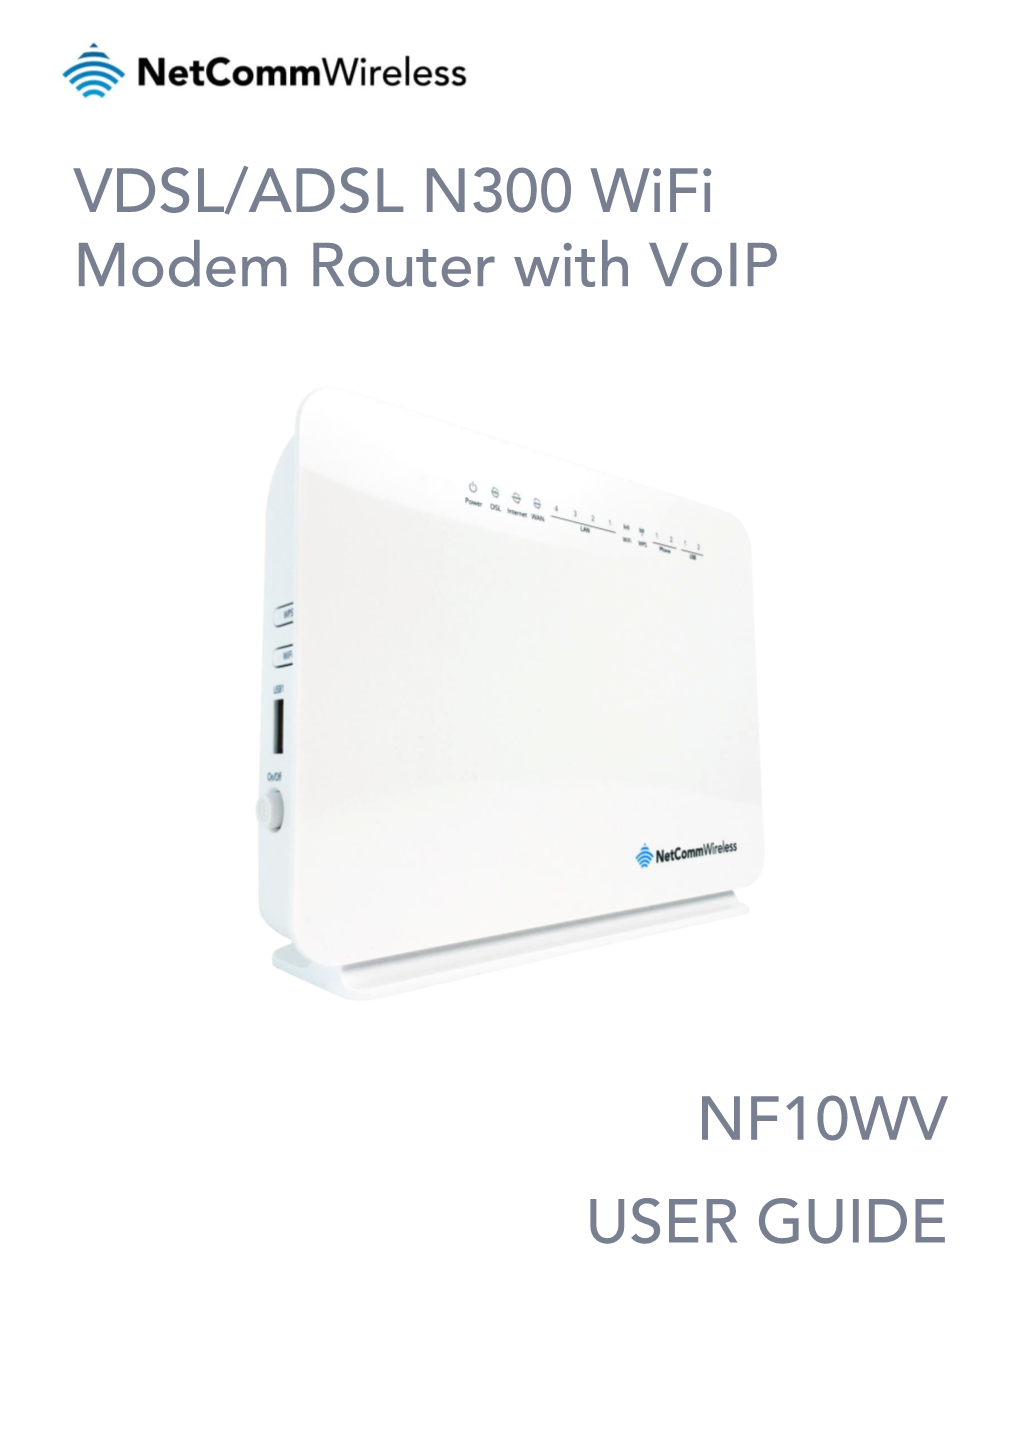 VDSL/ADSL N300 Wifi Modem Router with Voip NF10WV USER